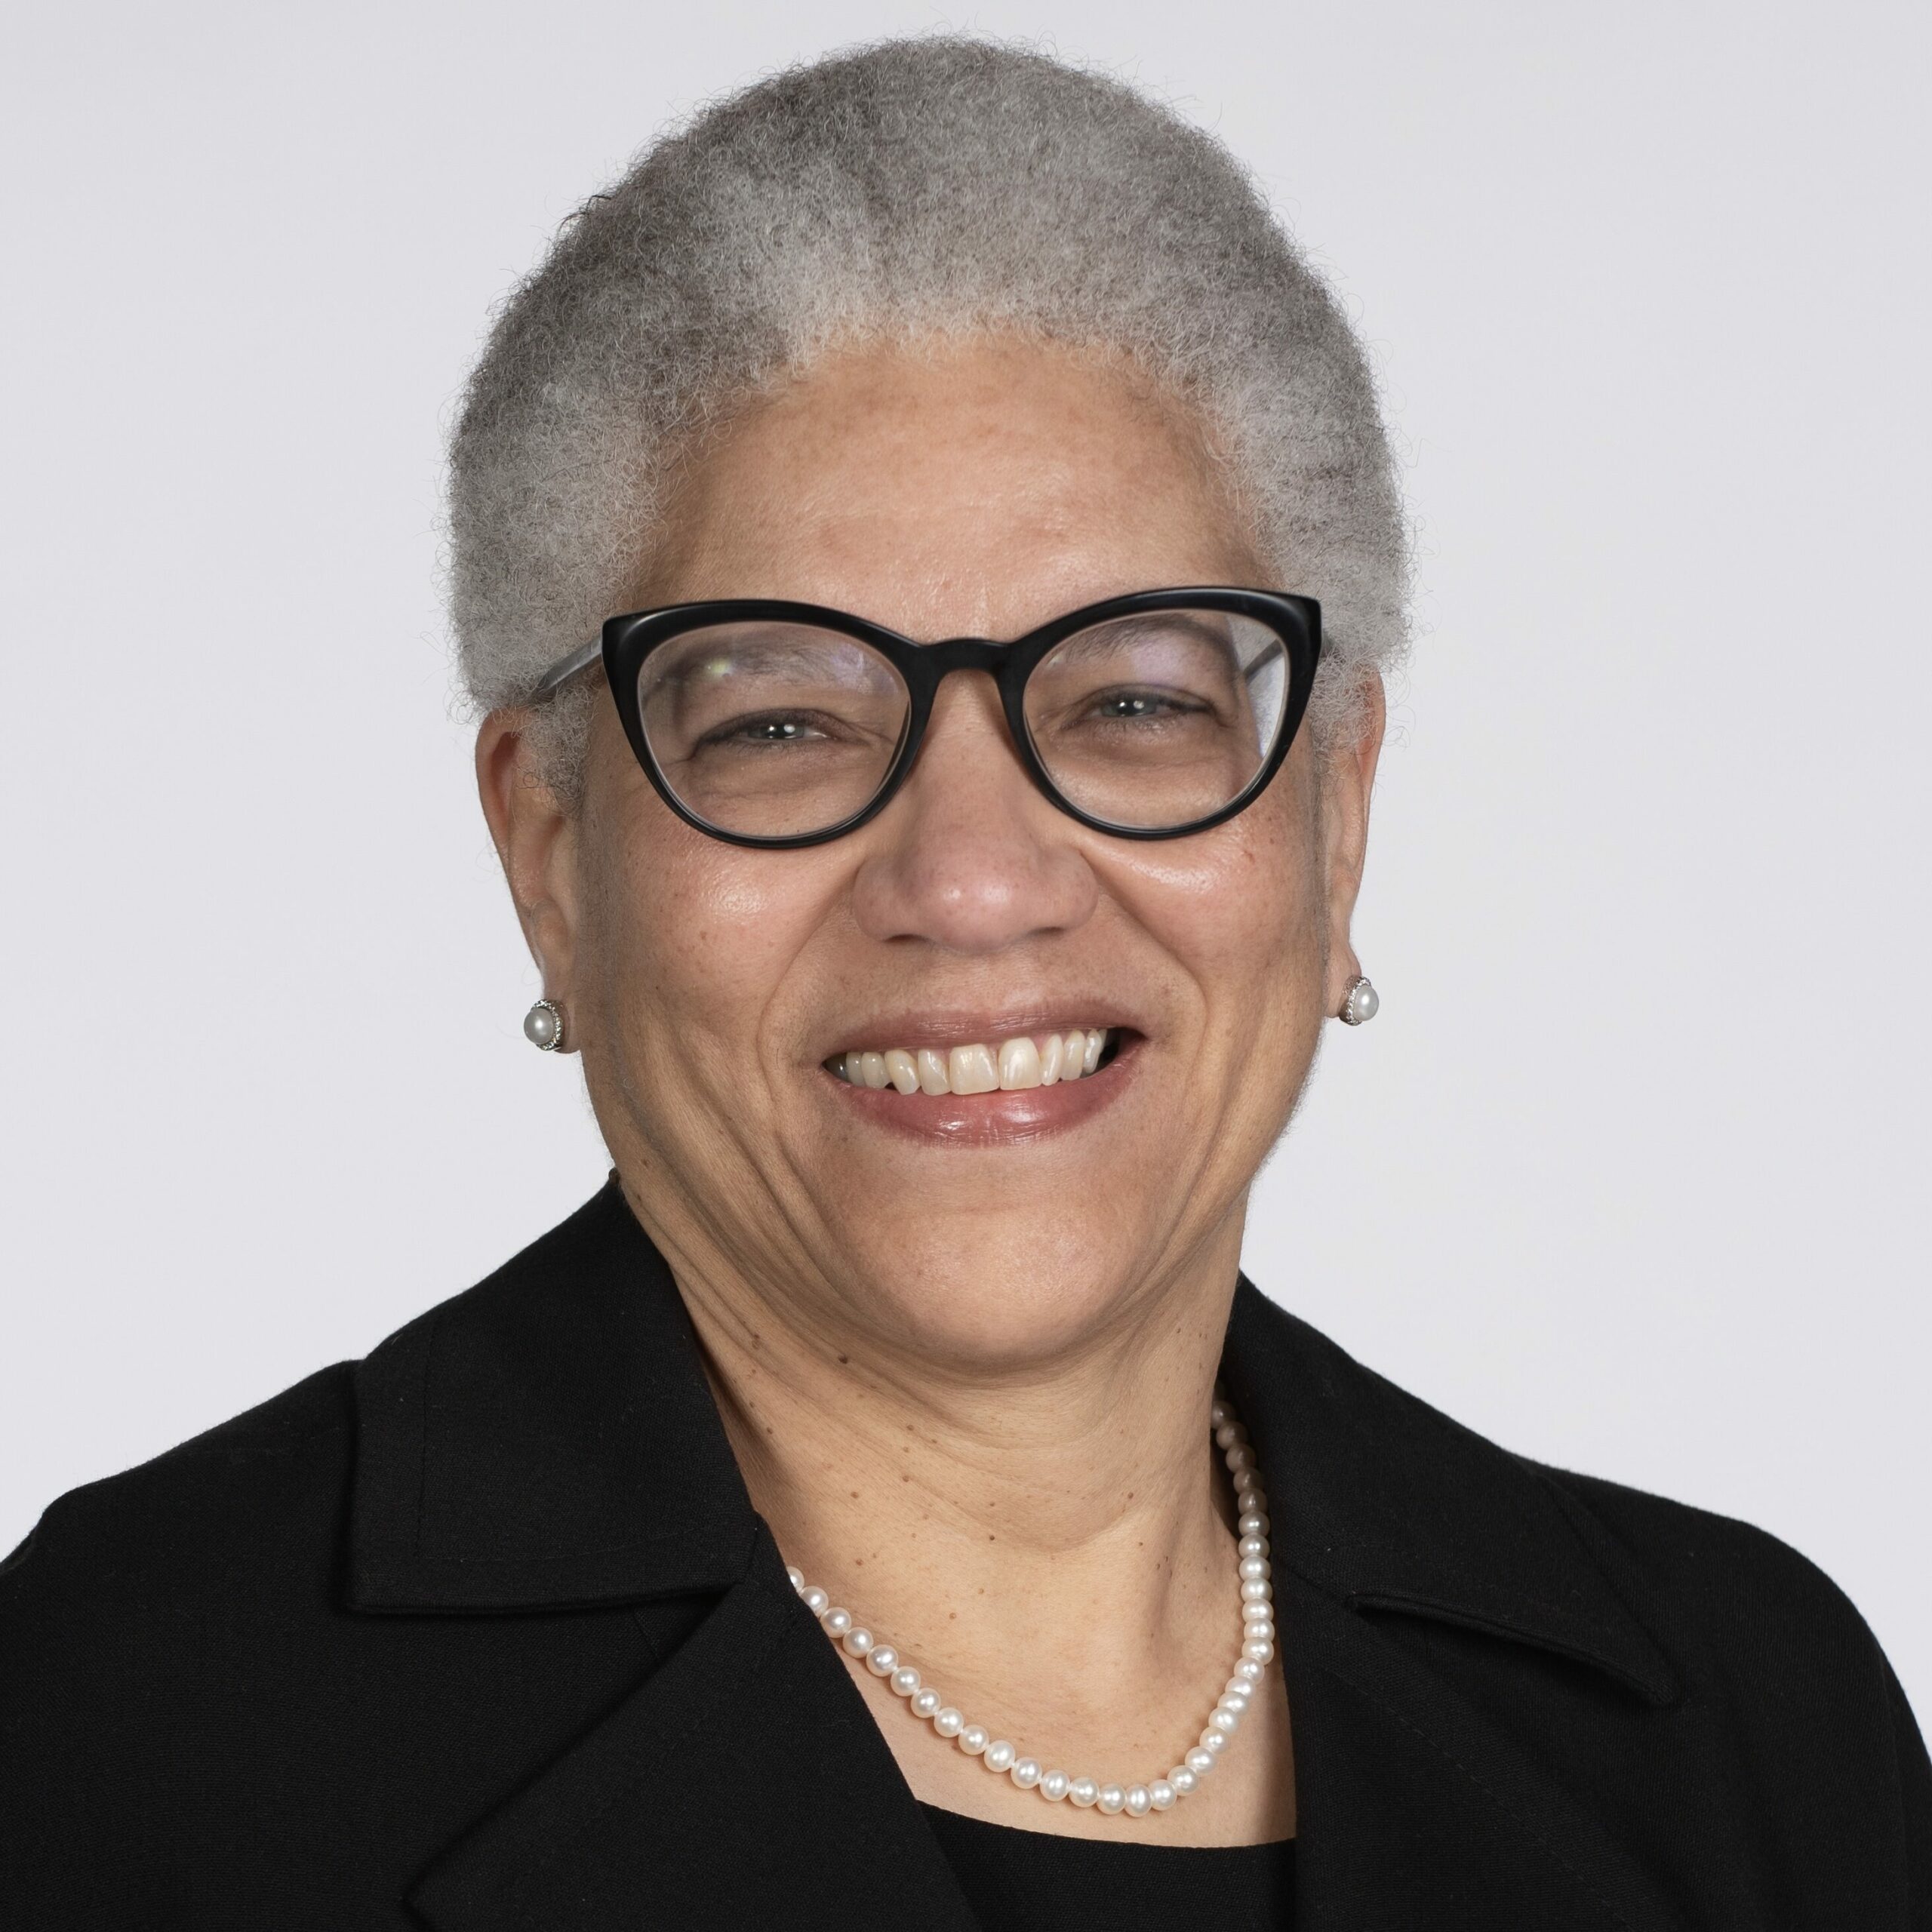 Portrait of a Black woman with short grey hair, wearing glasses and a pearl necklace, smiling at the camera